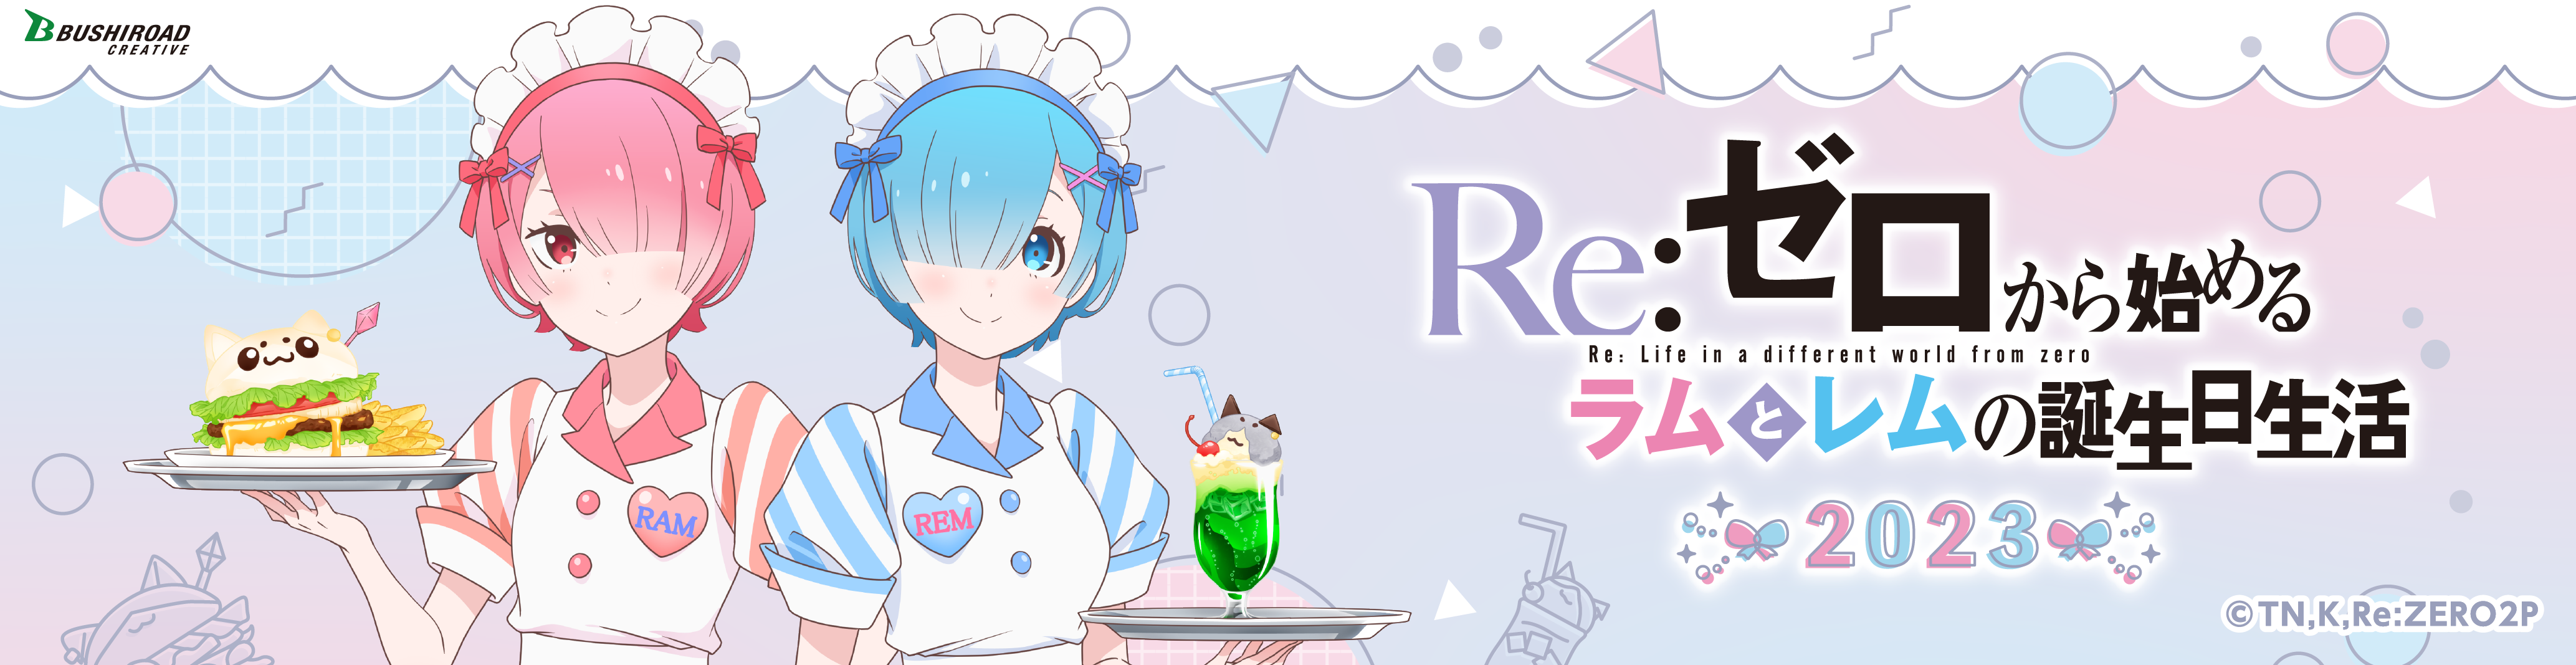 Re:ZERO -Starting Life in Another World- “Ram and Rem Birthday 2023” POP-UP Store